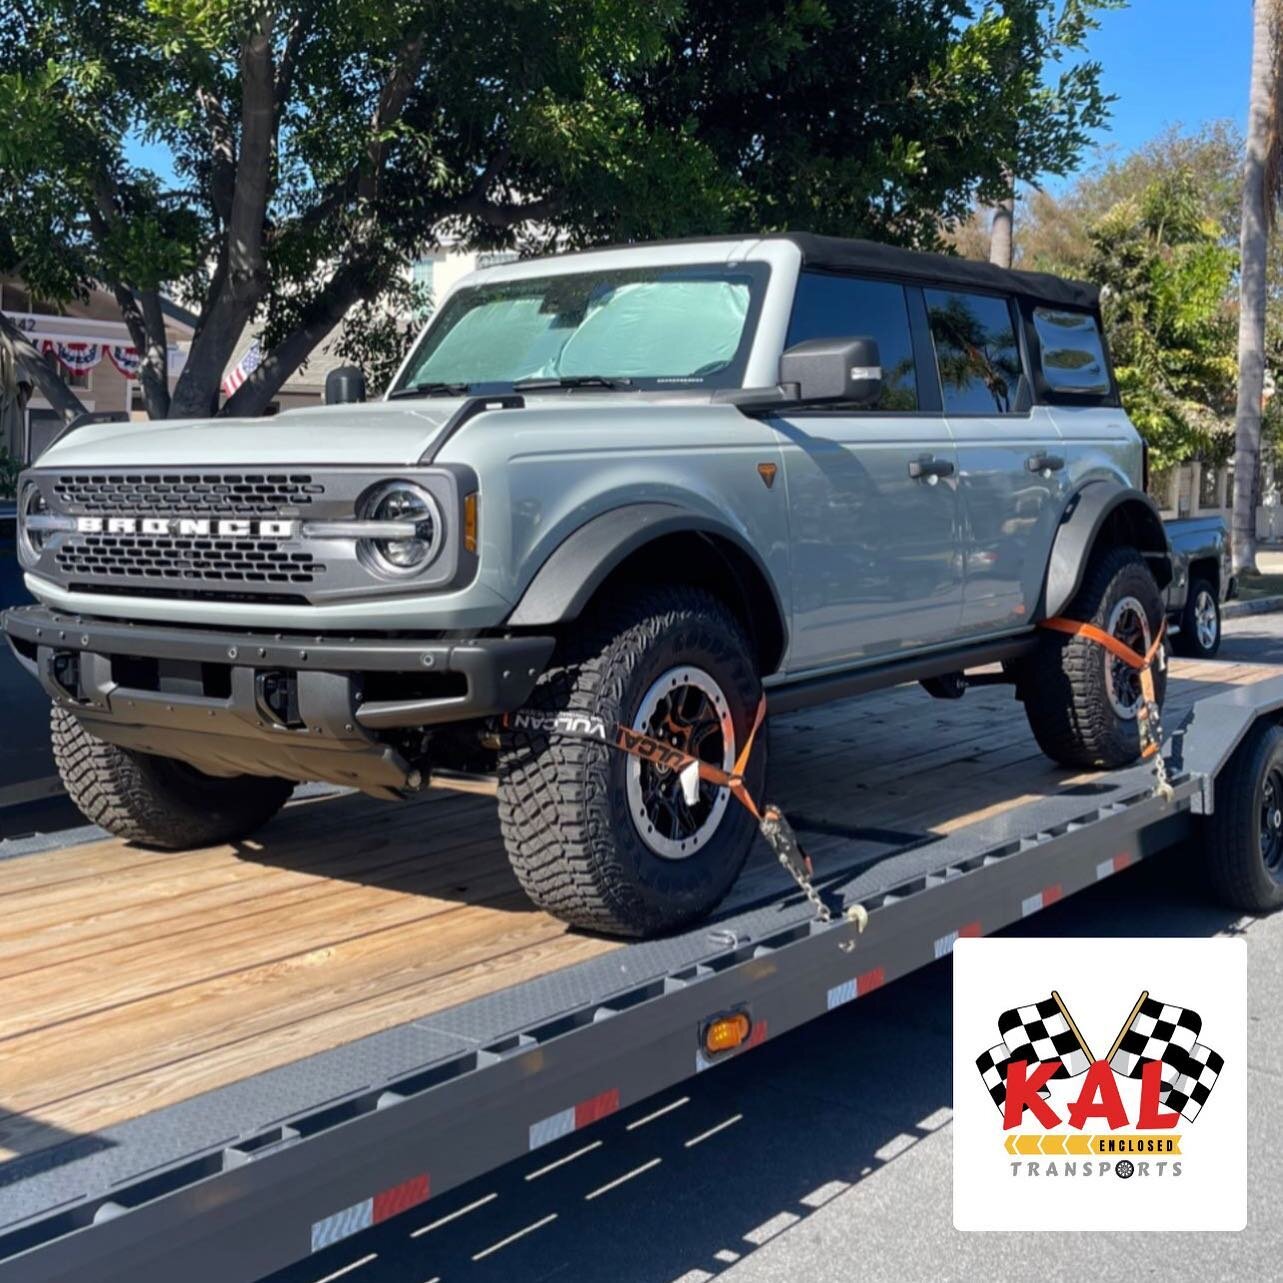 VIP Clients Bronco on the way w/ some of that #NextDayDelivery sauce 😎.

&bull;
&bull;
&bull; Need A Ride! #CallKal 3307016803
&bull;
&bull;
#KalTransports #RideWitKAL #EnclosedTransport #BlackOwned #AutoTransport #ExoticTransport #rollsroyce #CarsA